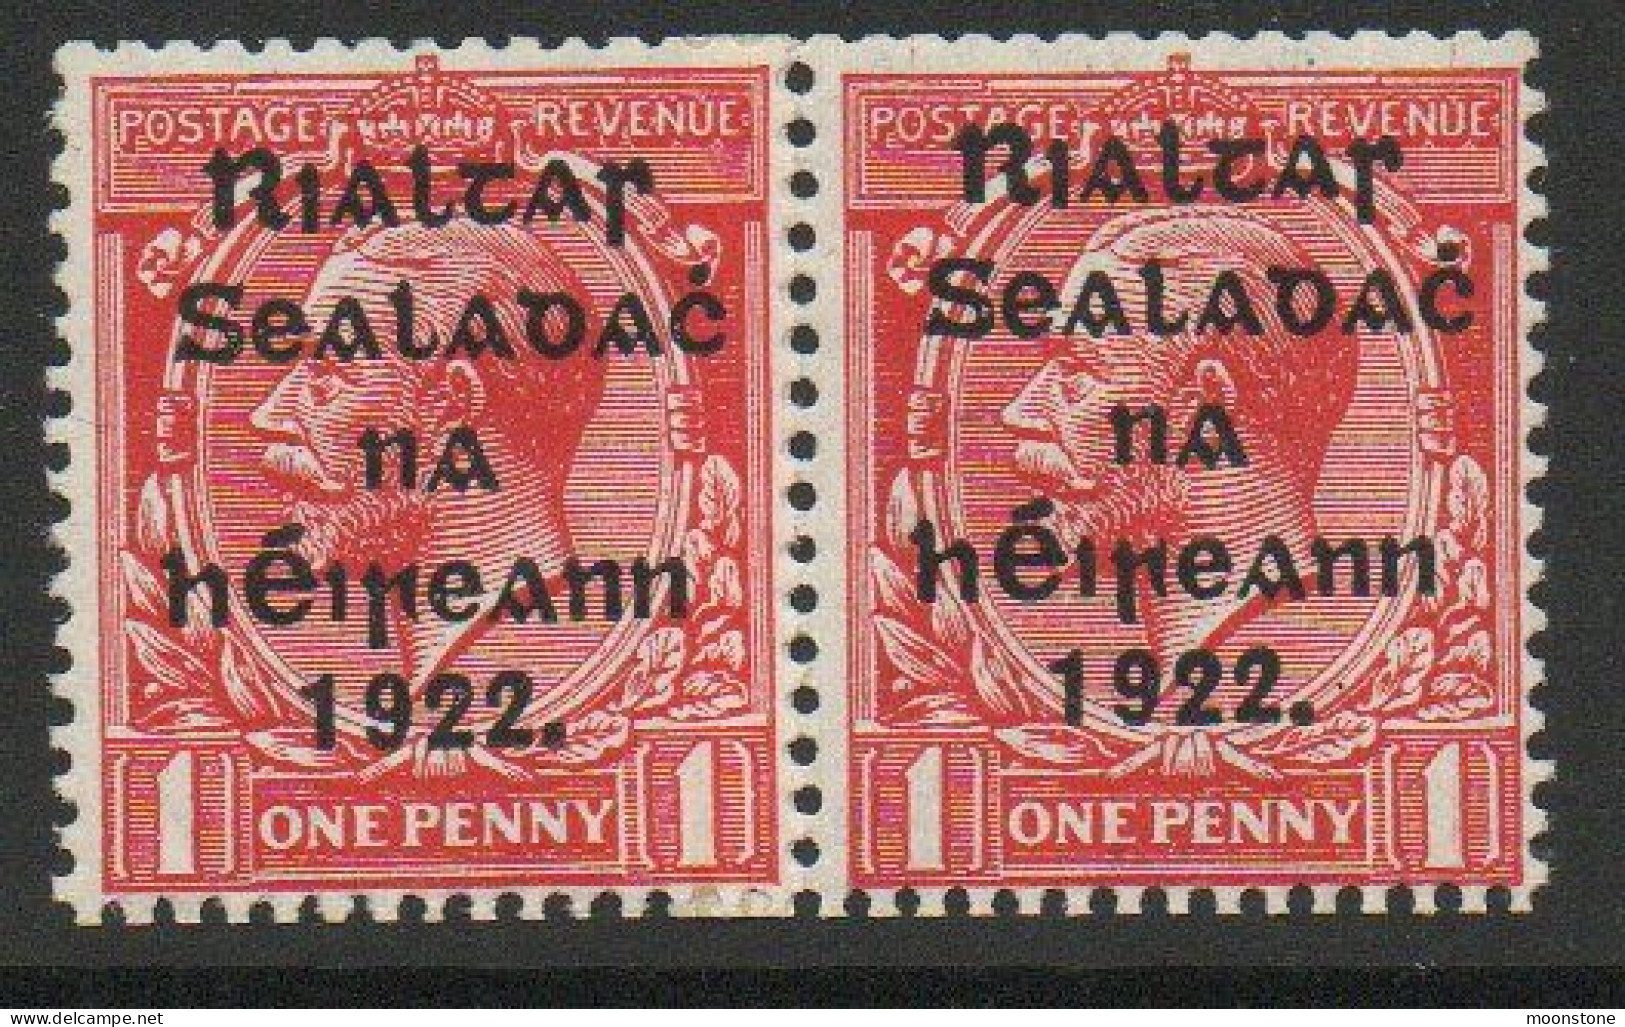 Ireland 1922 Harrison Rialtas Overprint 1d Coil Pair With Coil Join, Hinged Mint, SG 27 - Unused Stamps